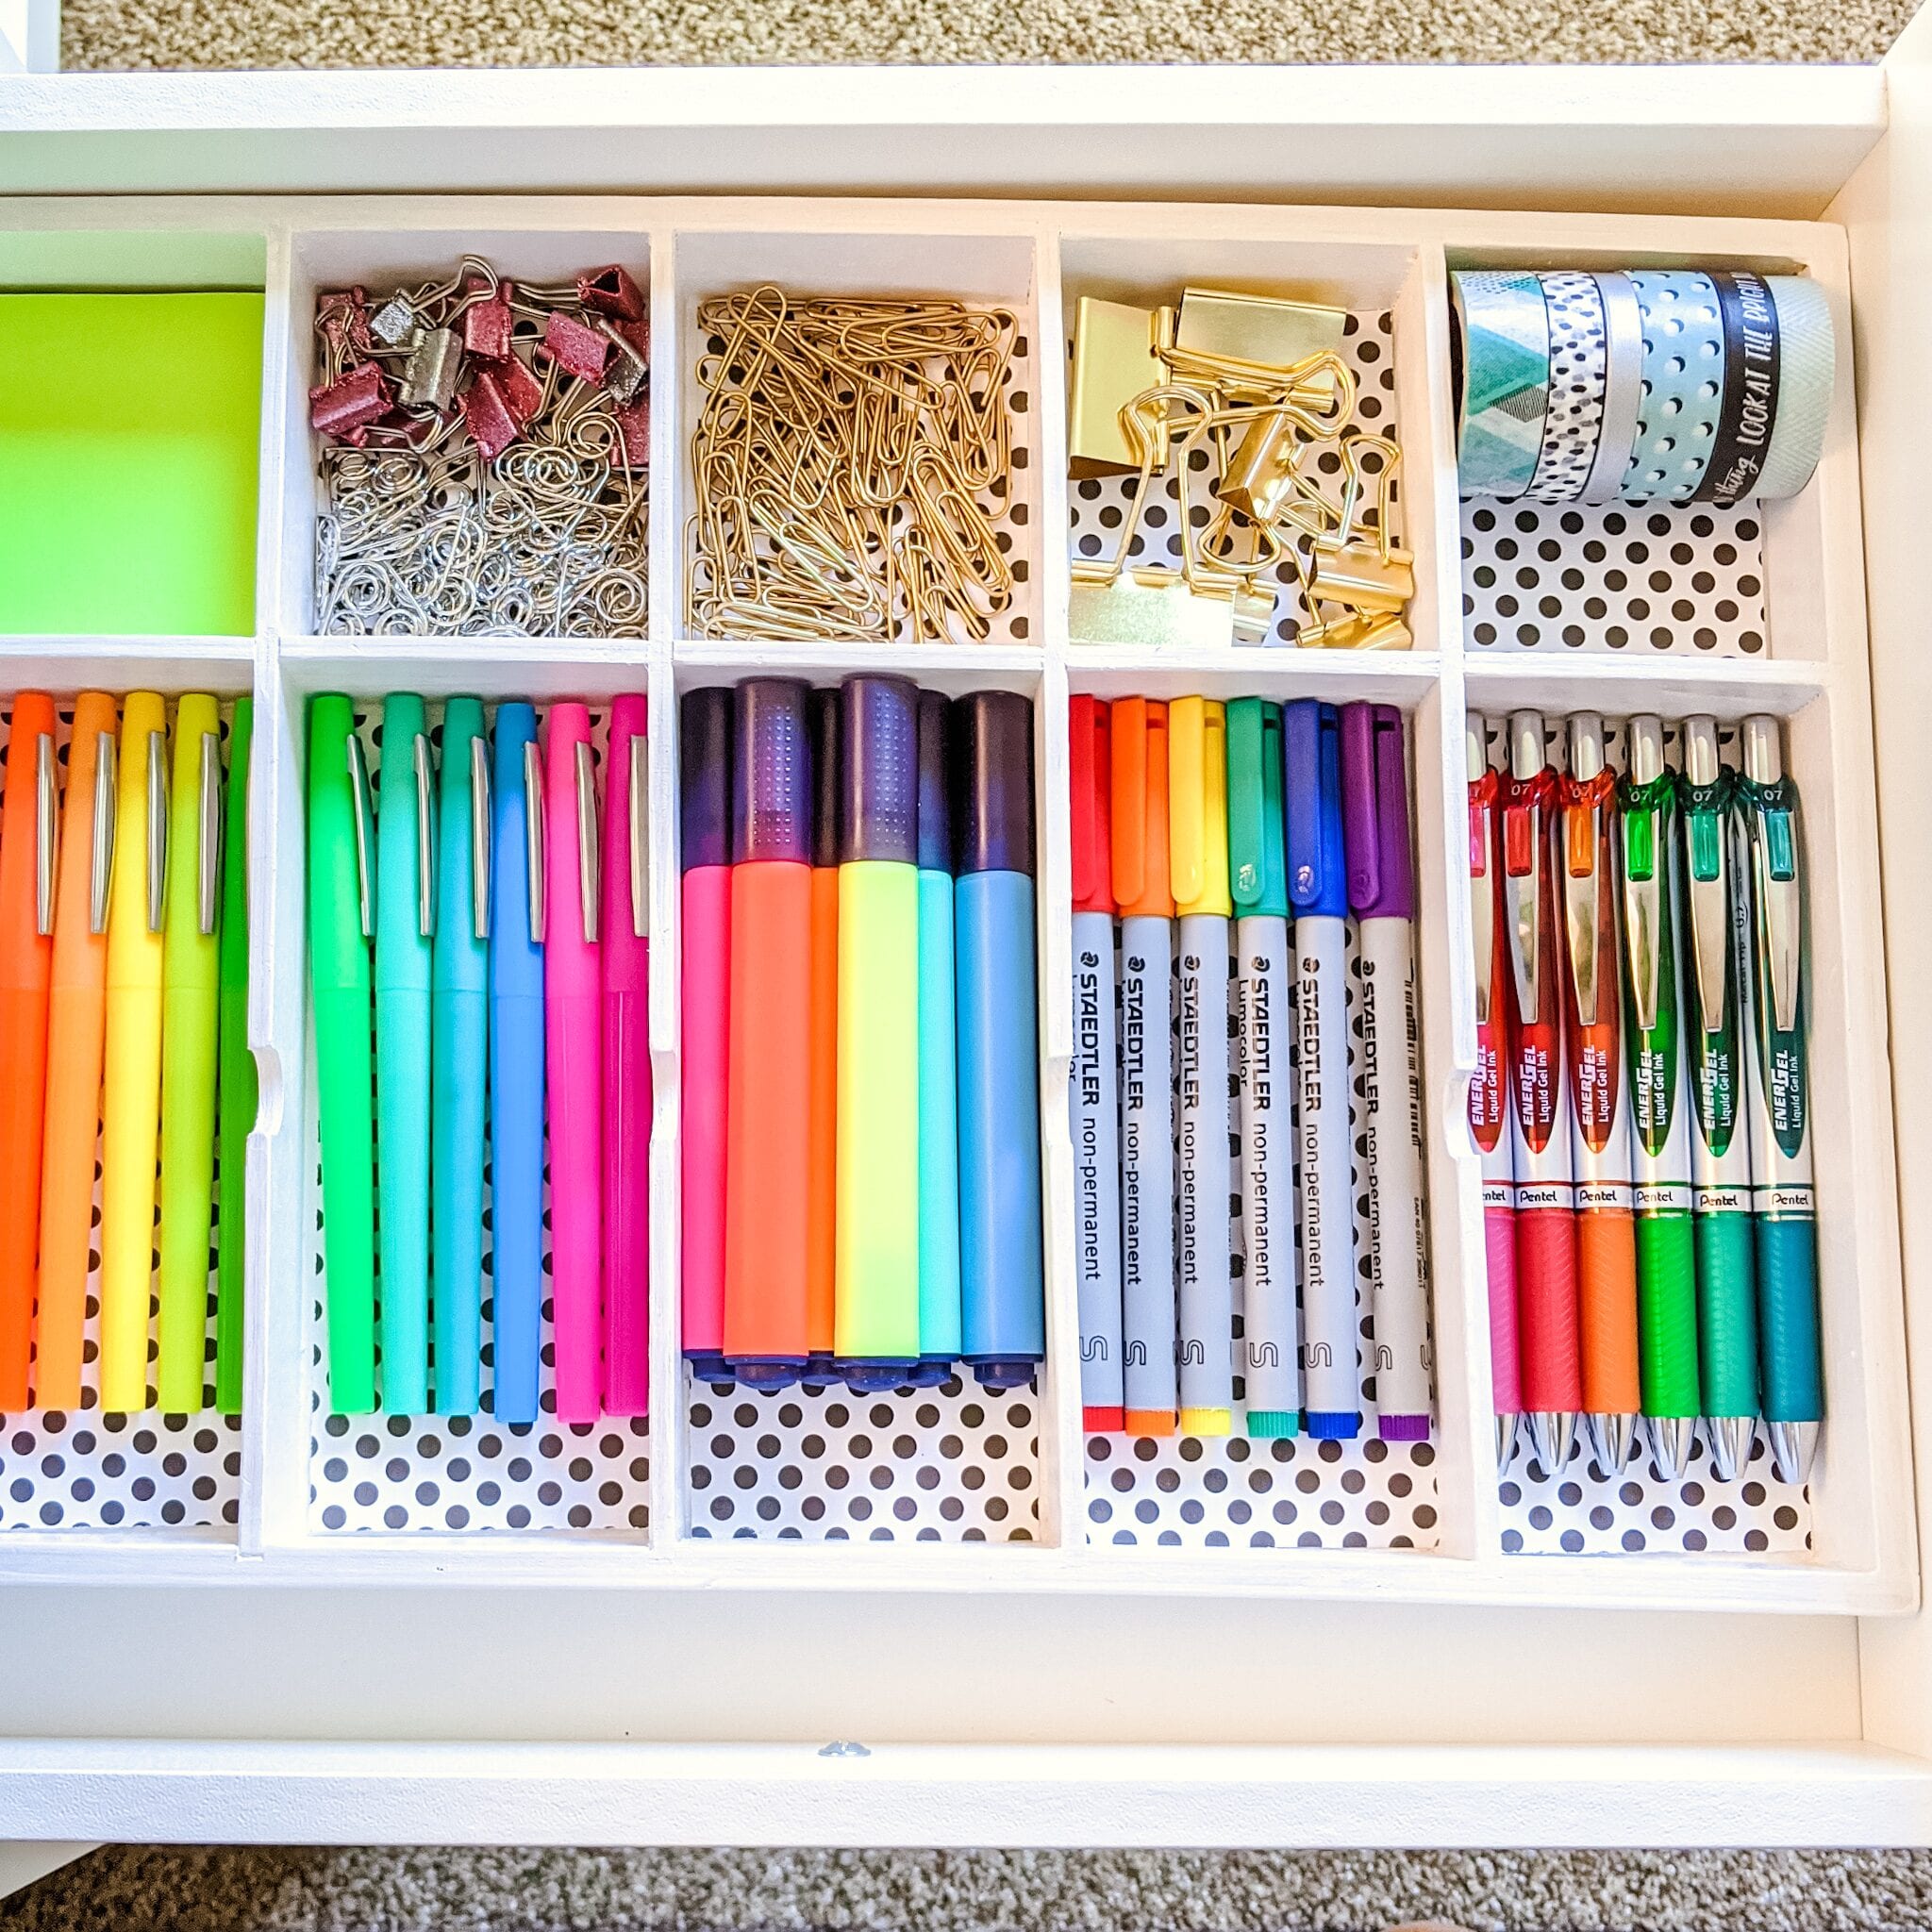 8 Easy Steps to Organize a Junk Drawer in 20 Minutes